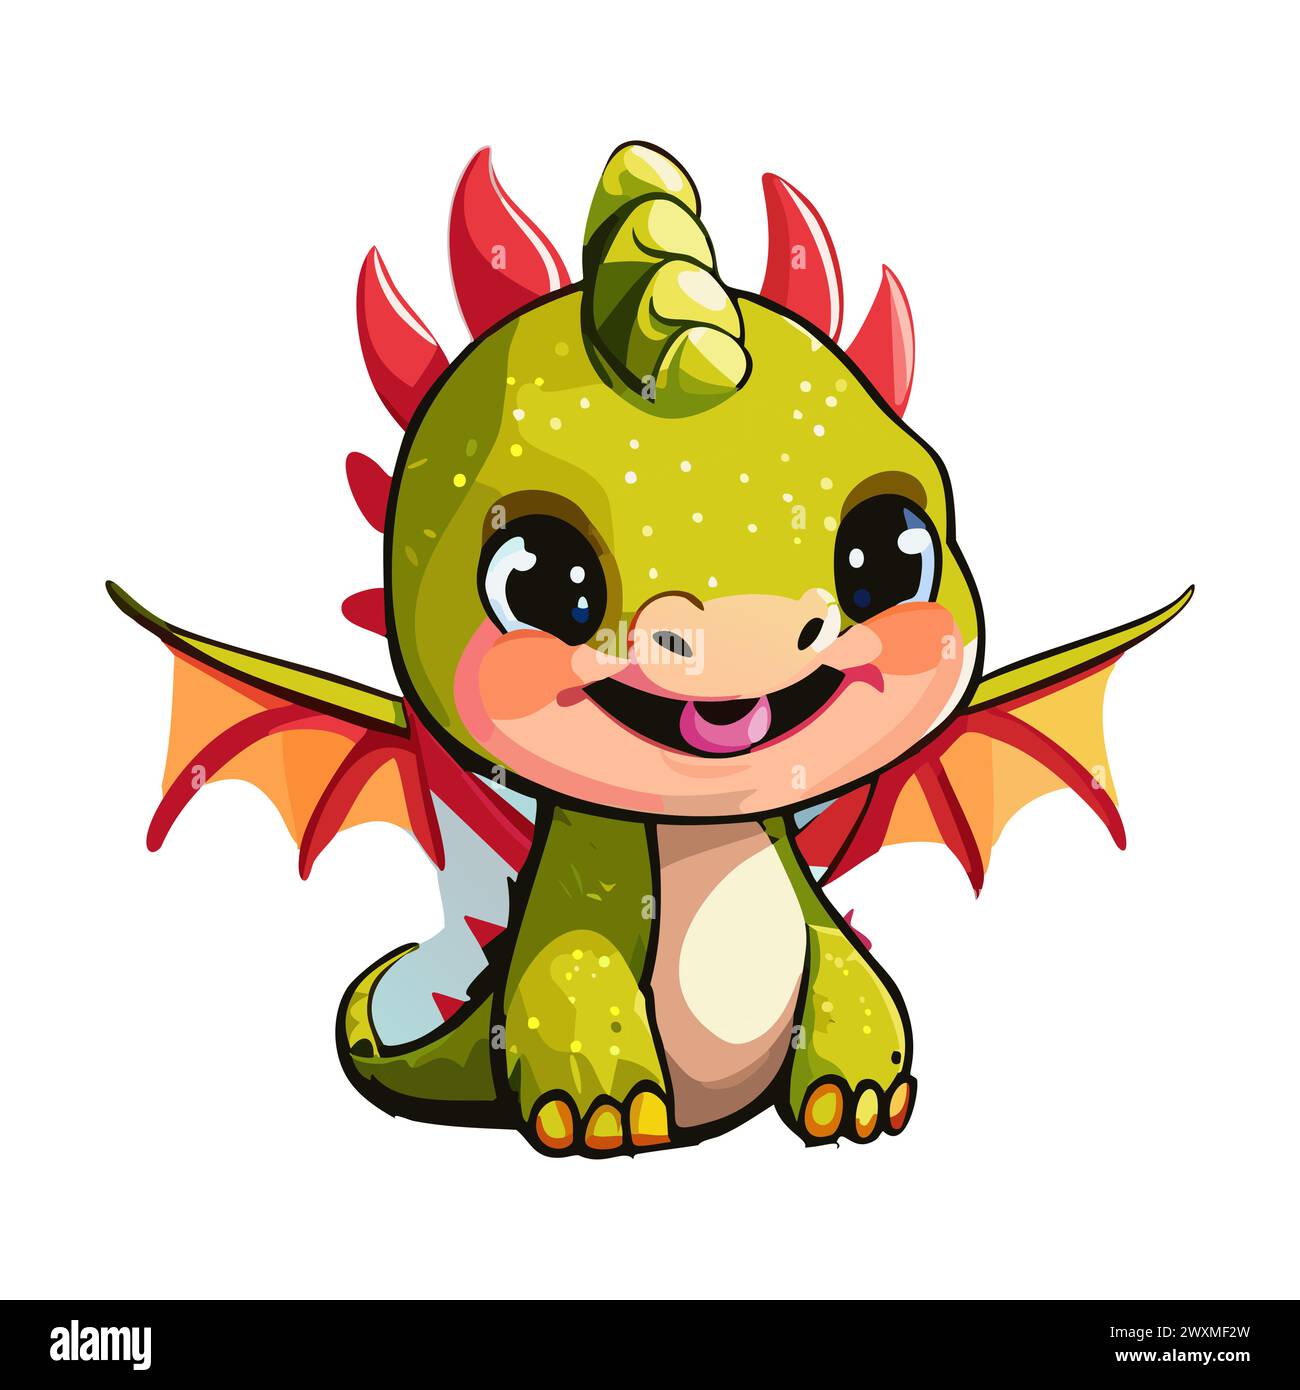 Cute little dragon cartoon with small wings vector art Stock Vector